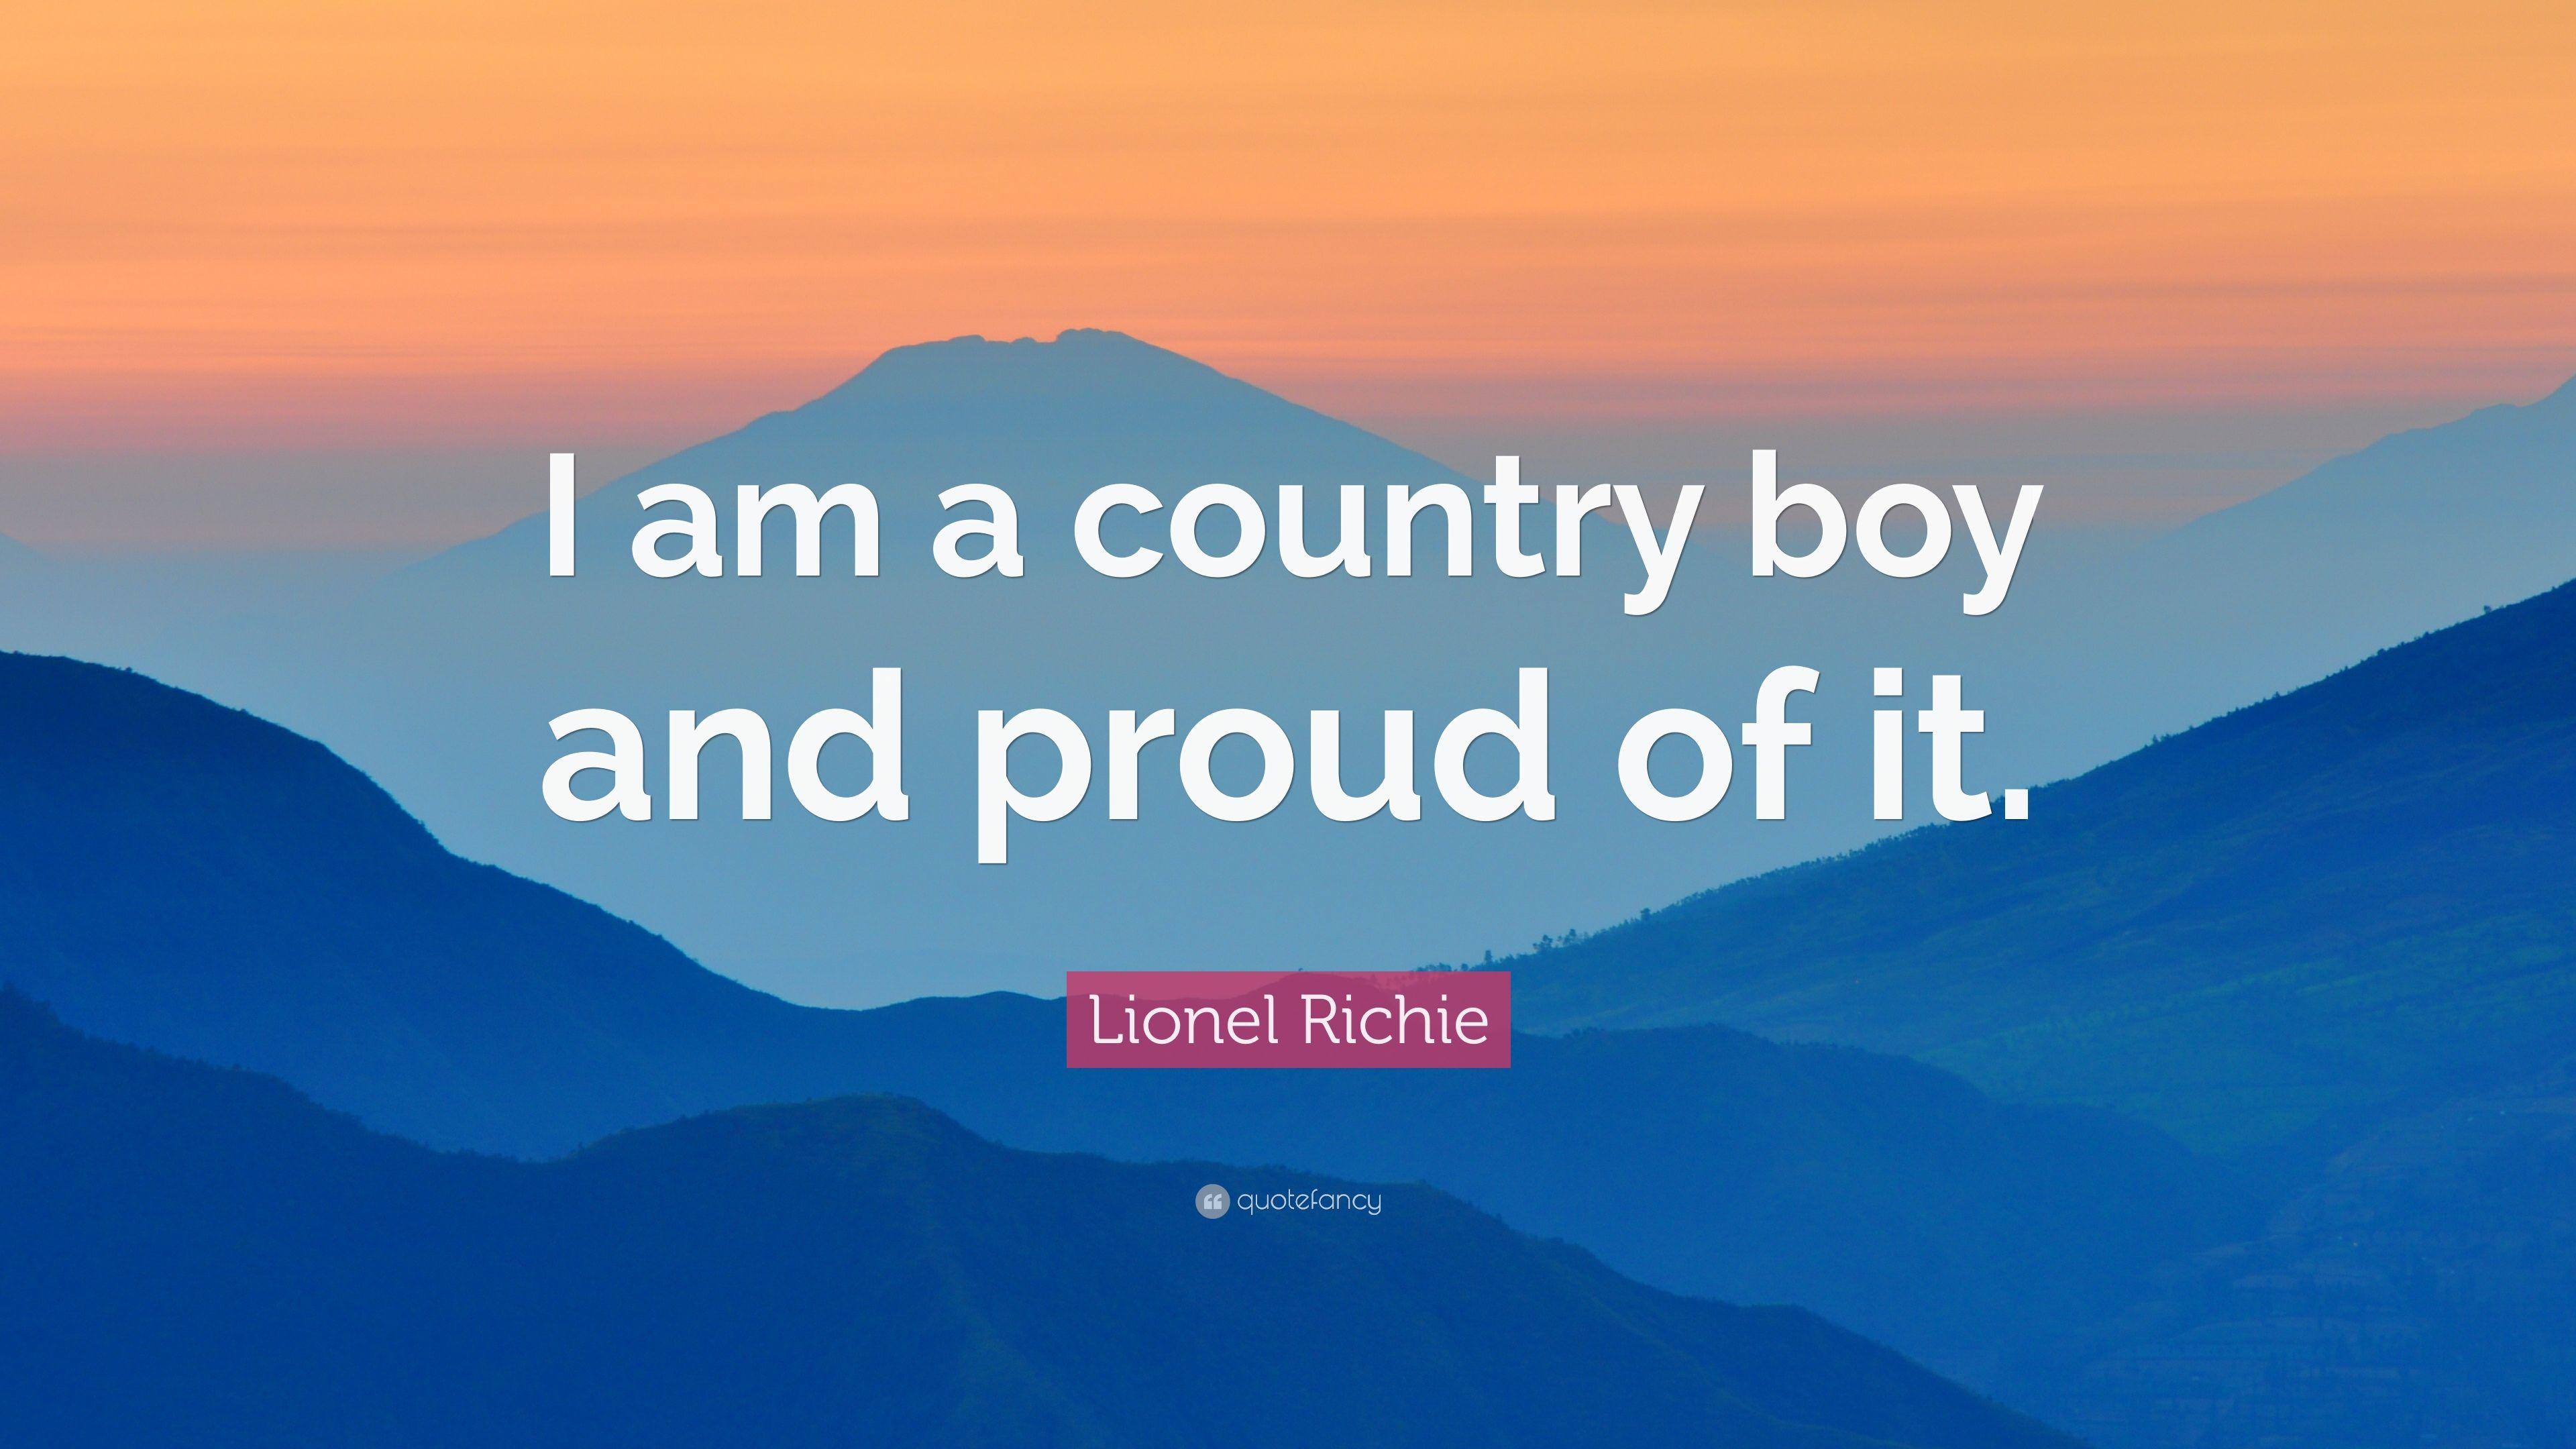 Lionel Richie Quote: “I am a country boy and proud of it.” 7